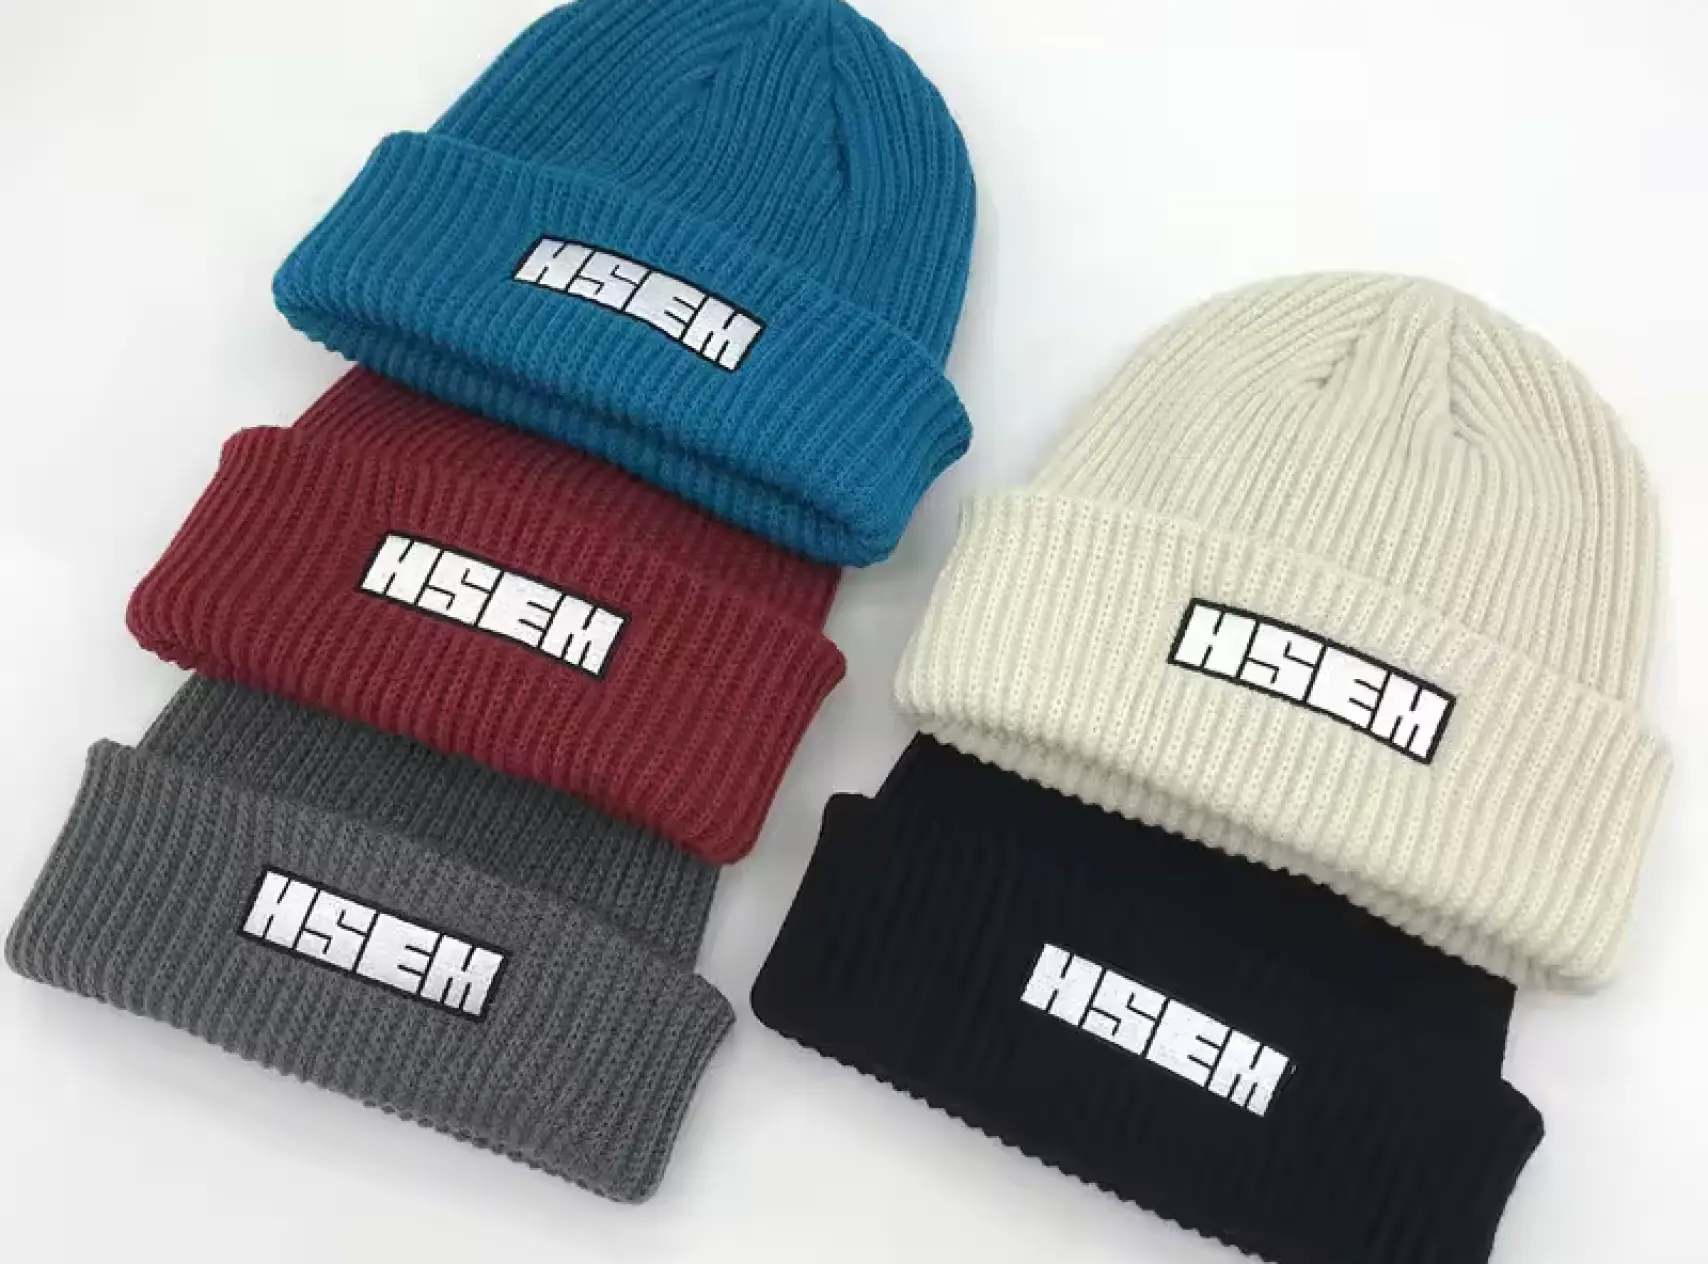 Colorful beanies